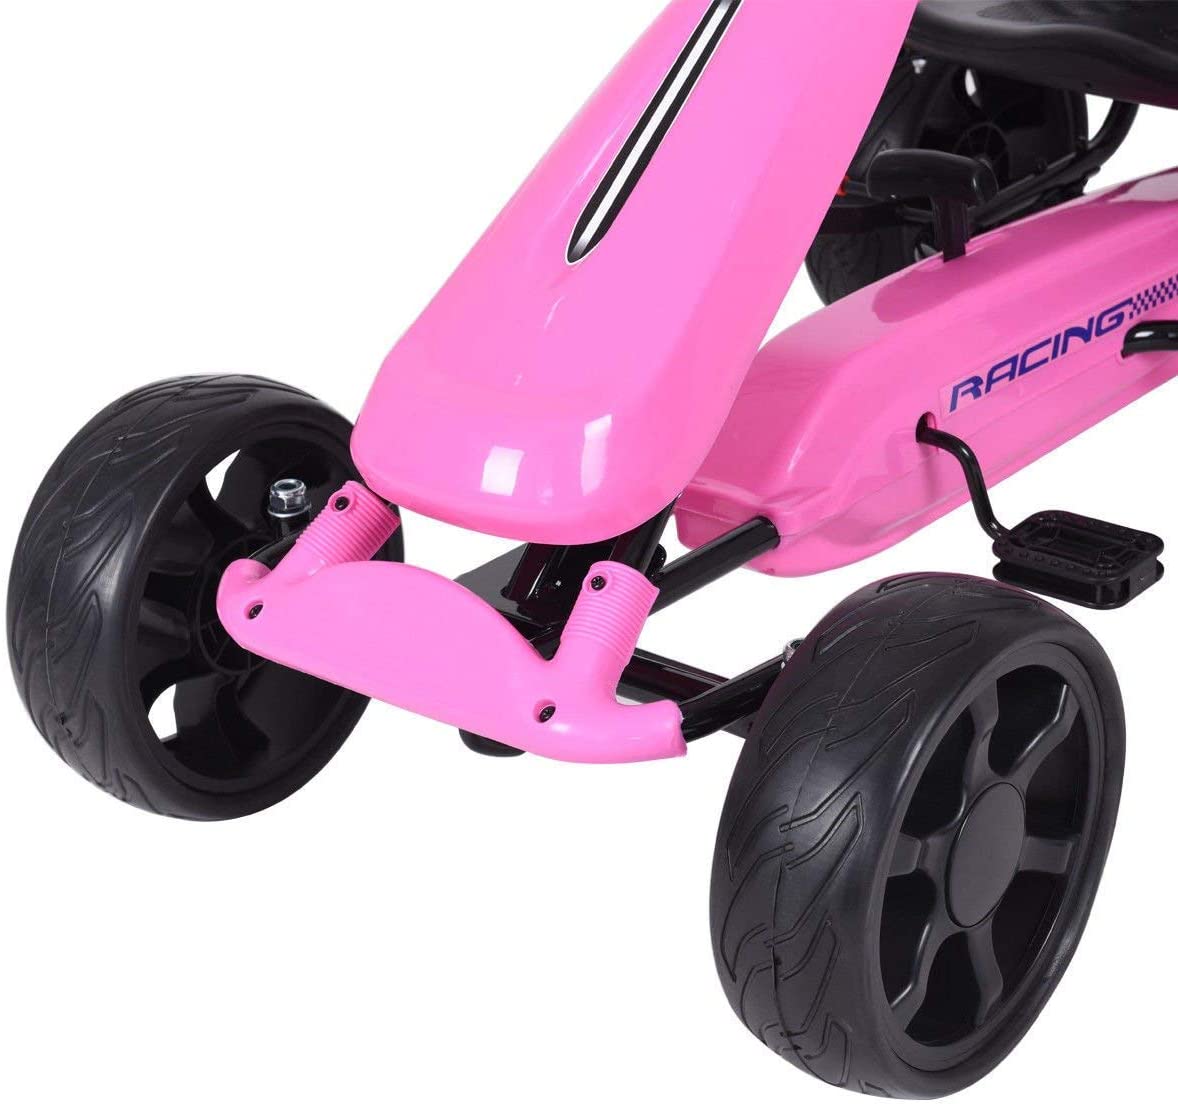 7 of the Best Go Karts For Kids Available Today